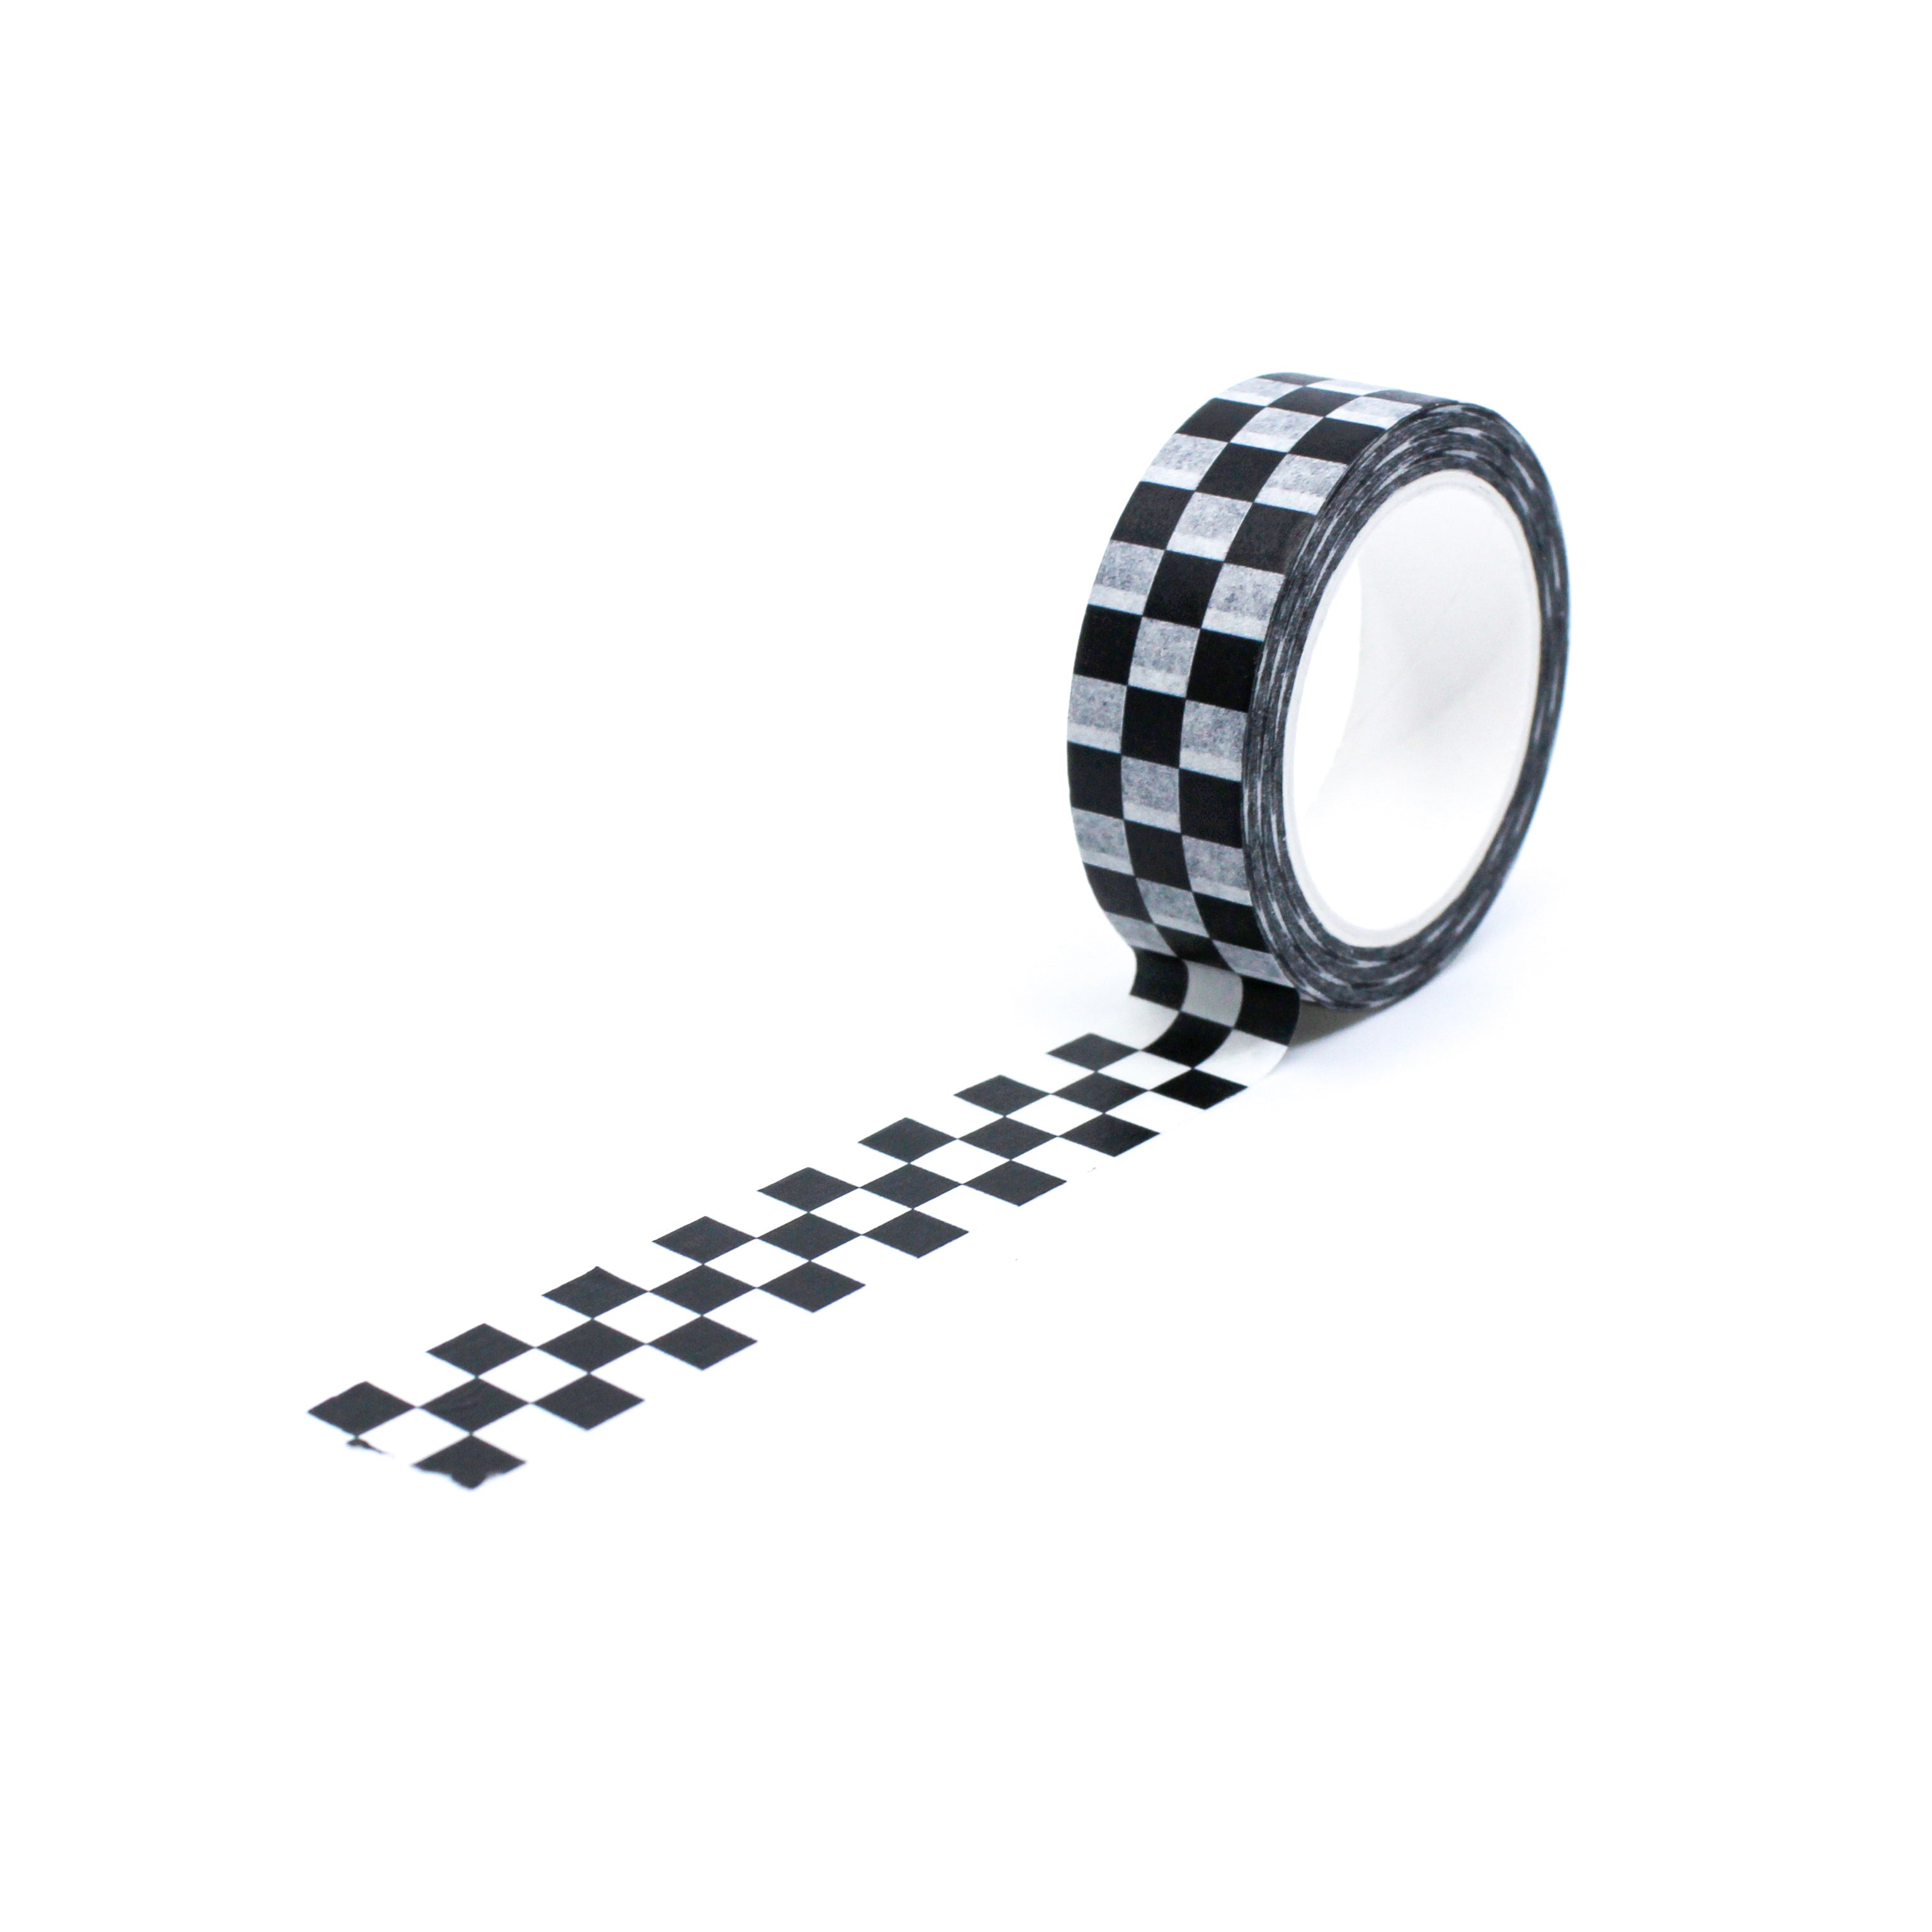 This is a full pattern repeat view of black checkerboard washi tape BBB Supplies Craft Shop